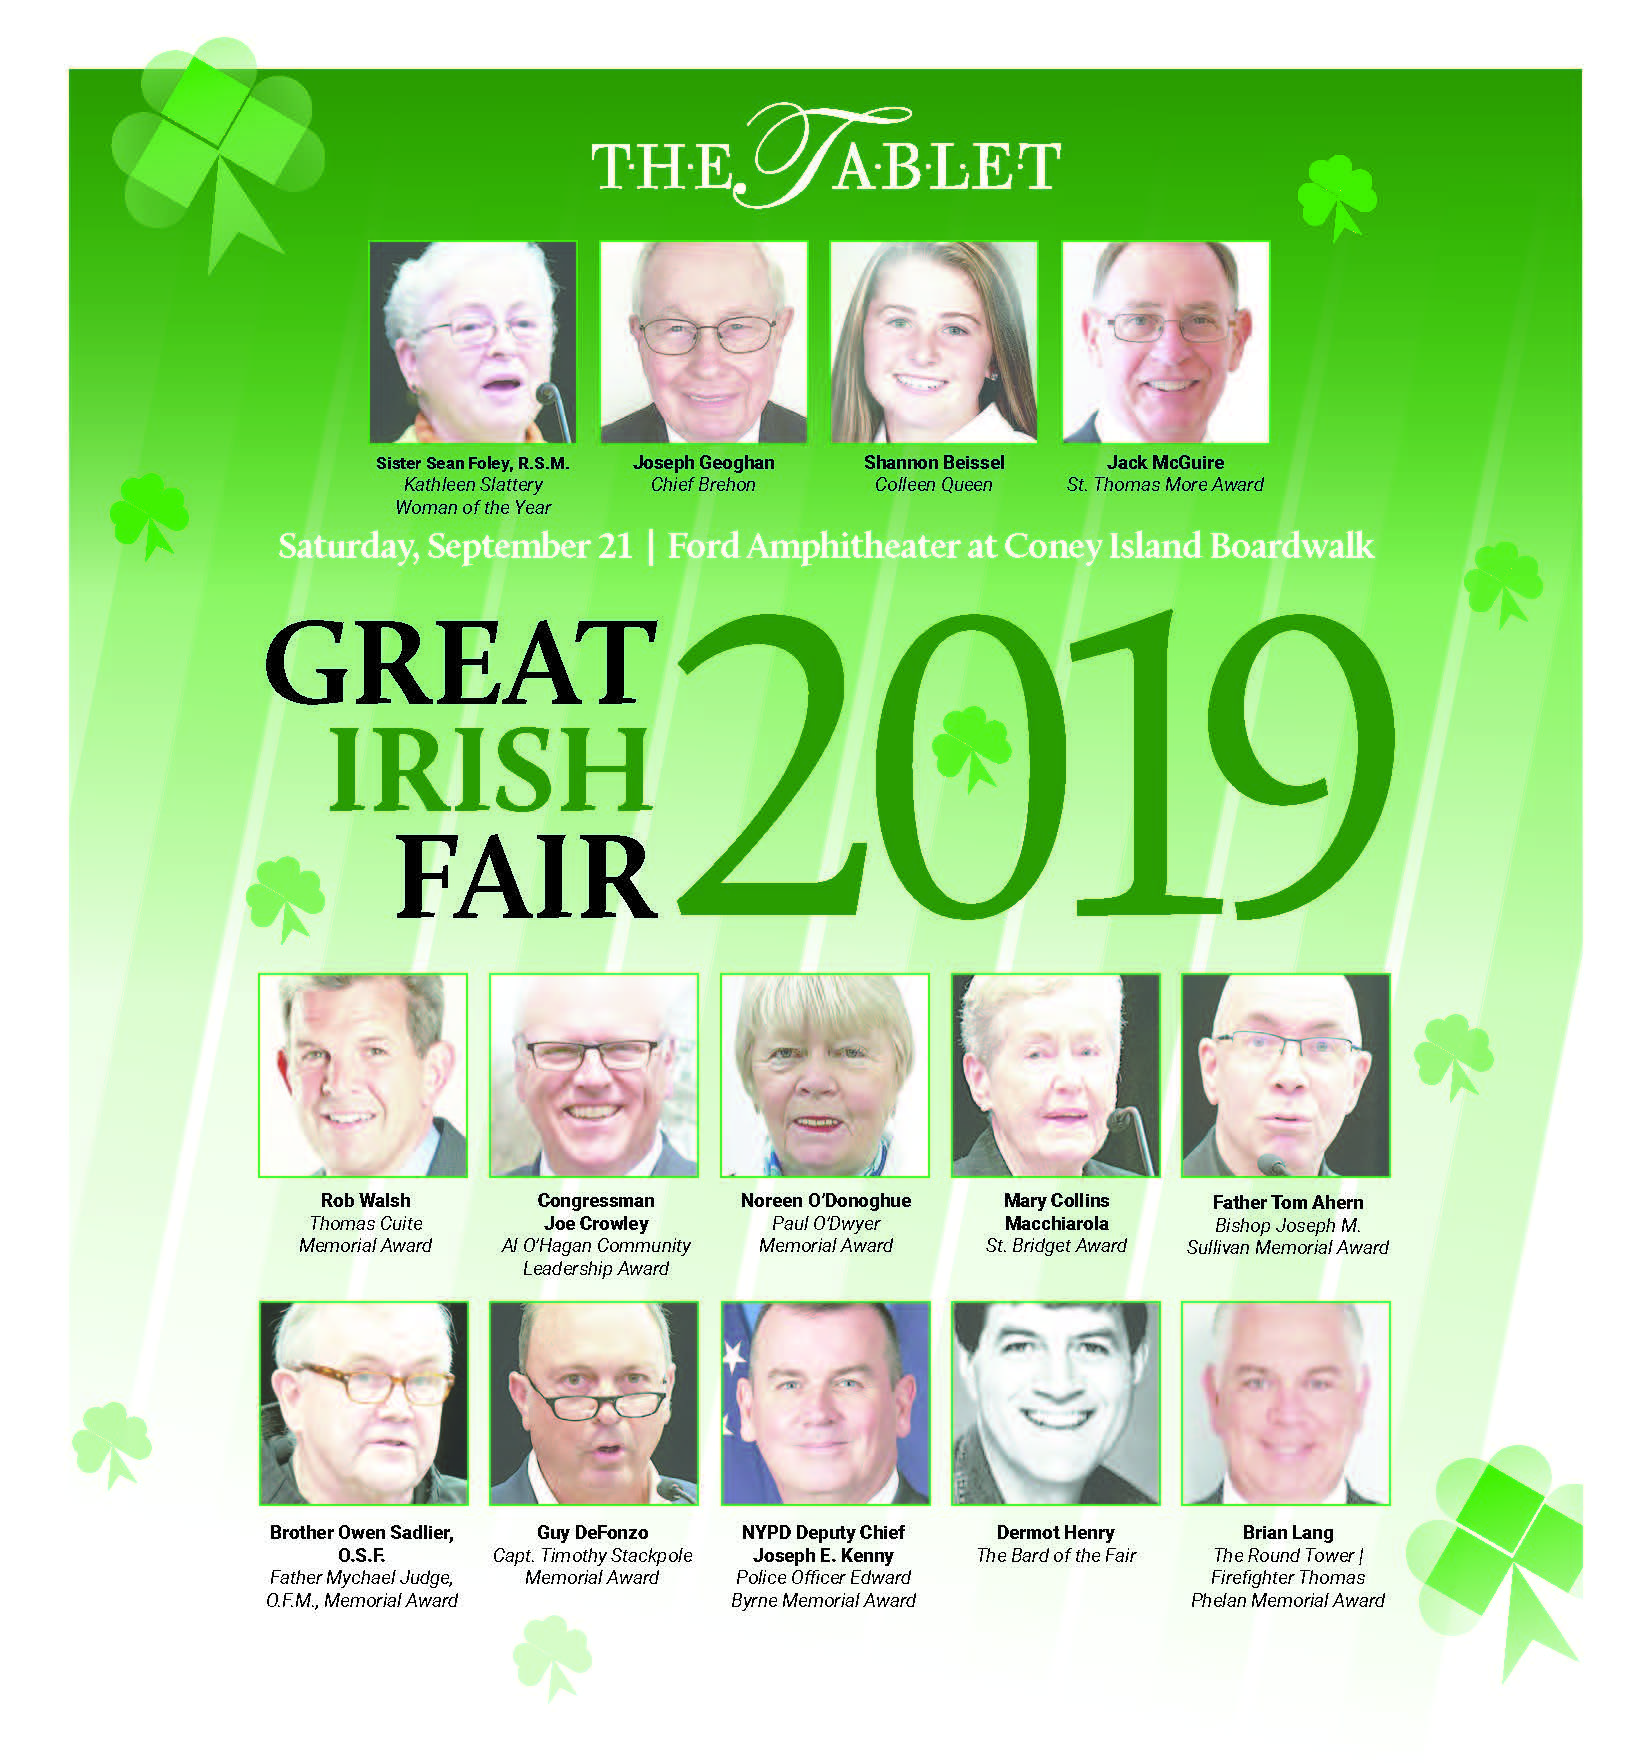 The 38th Great Irish Fair of New York The Tablet